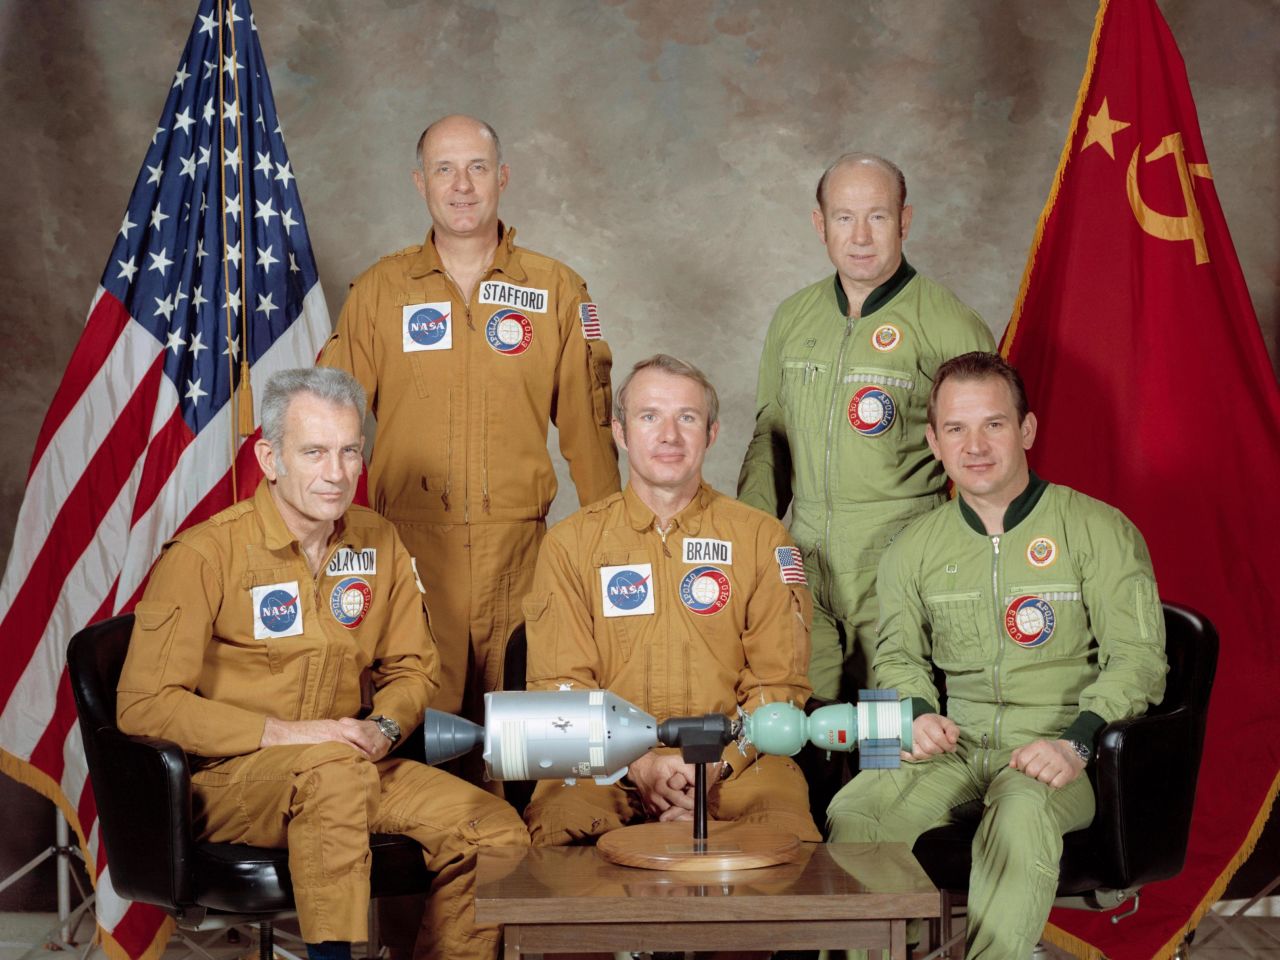 On July 15, 1975, Cold War adversaries temporarily broke the thaw when the United States and the Soviet Union embarked on their first joint space mission. Russia's Soyuz craft launched seven hours before the US Apollo craft, and the two vehicles linked up 52 hours after Soyuz lifted off. Here, the two crews pose for a portrait.